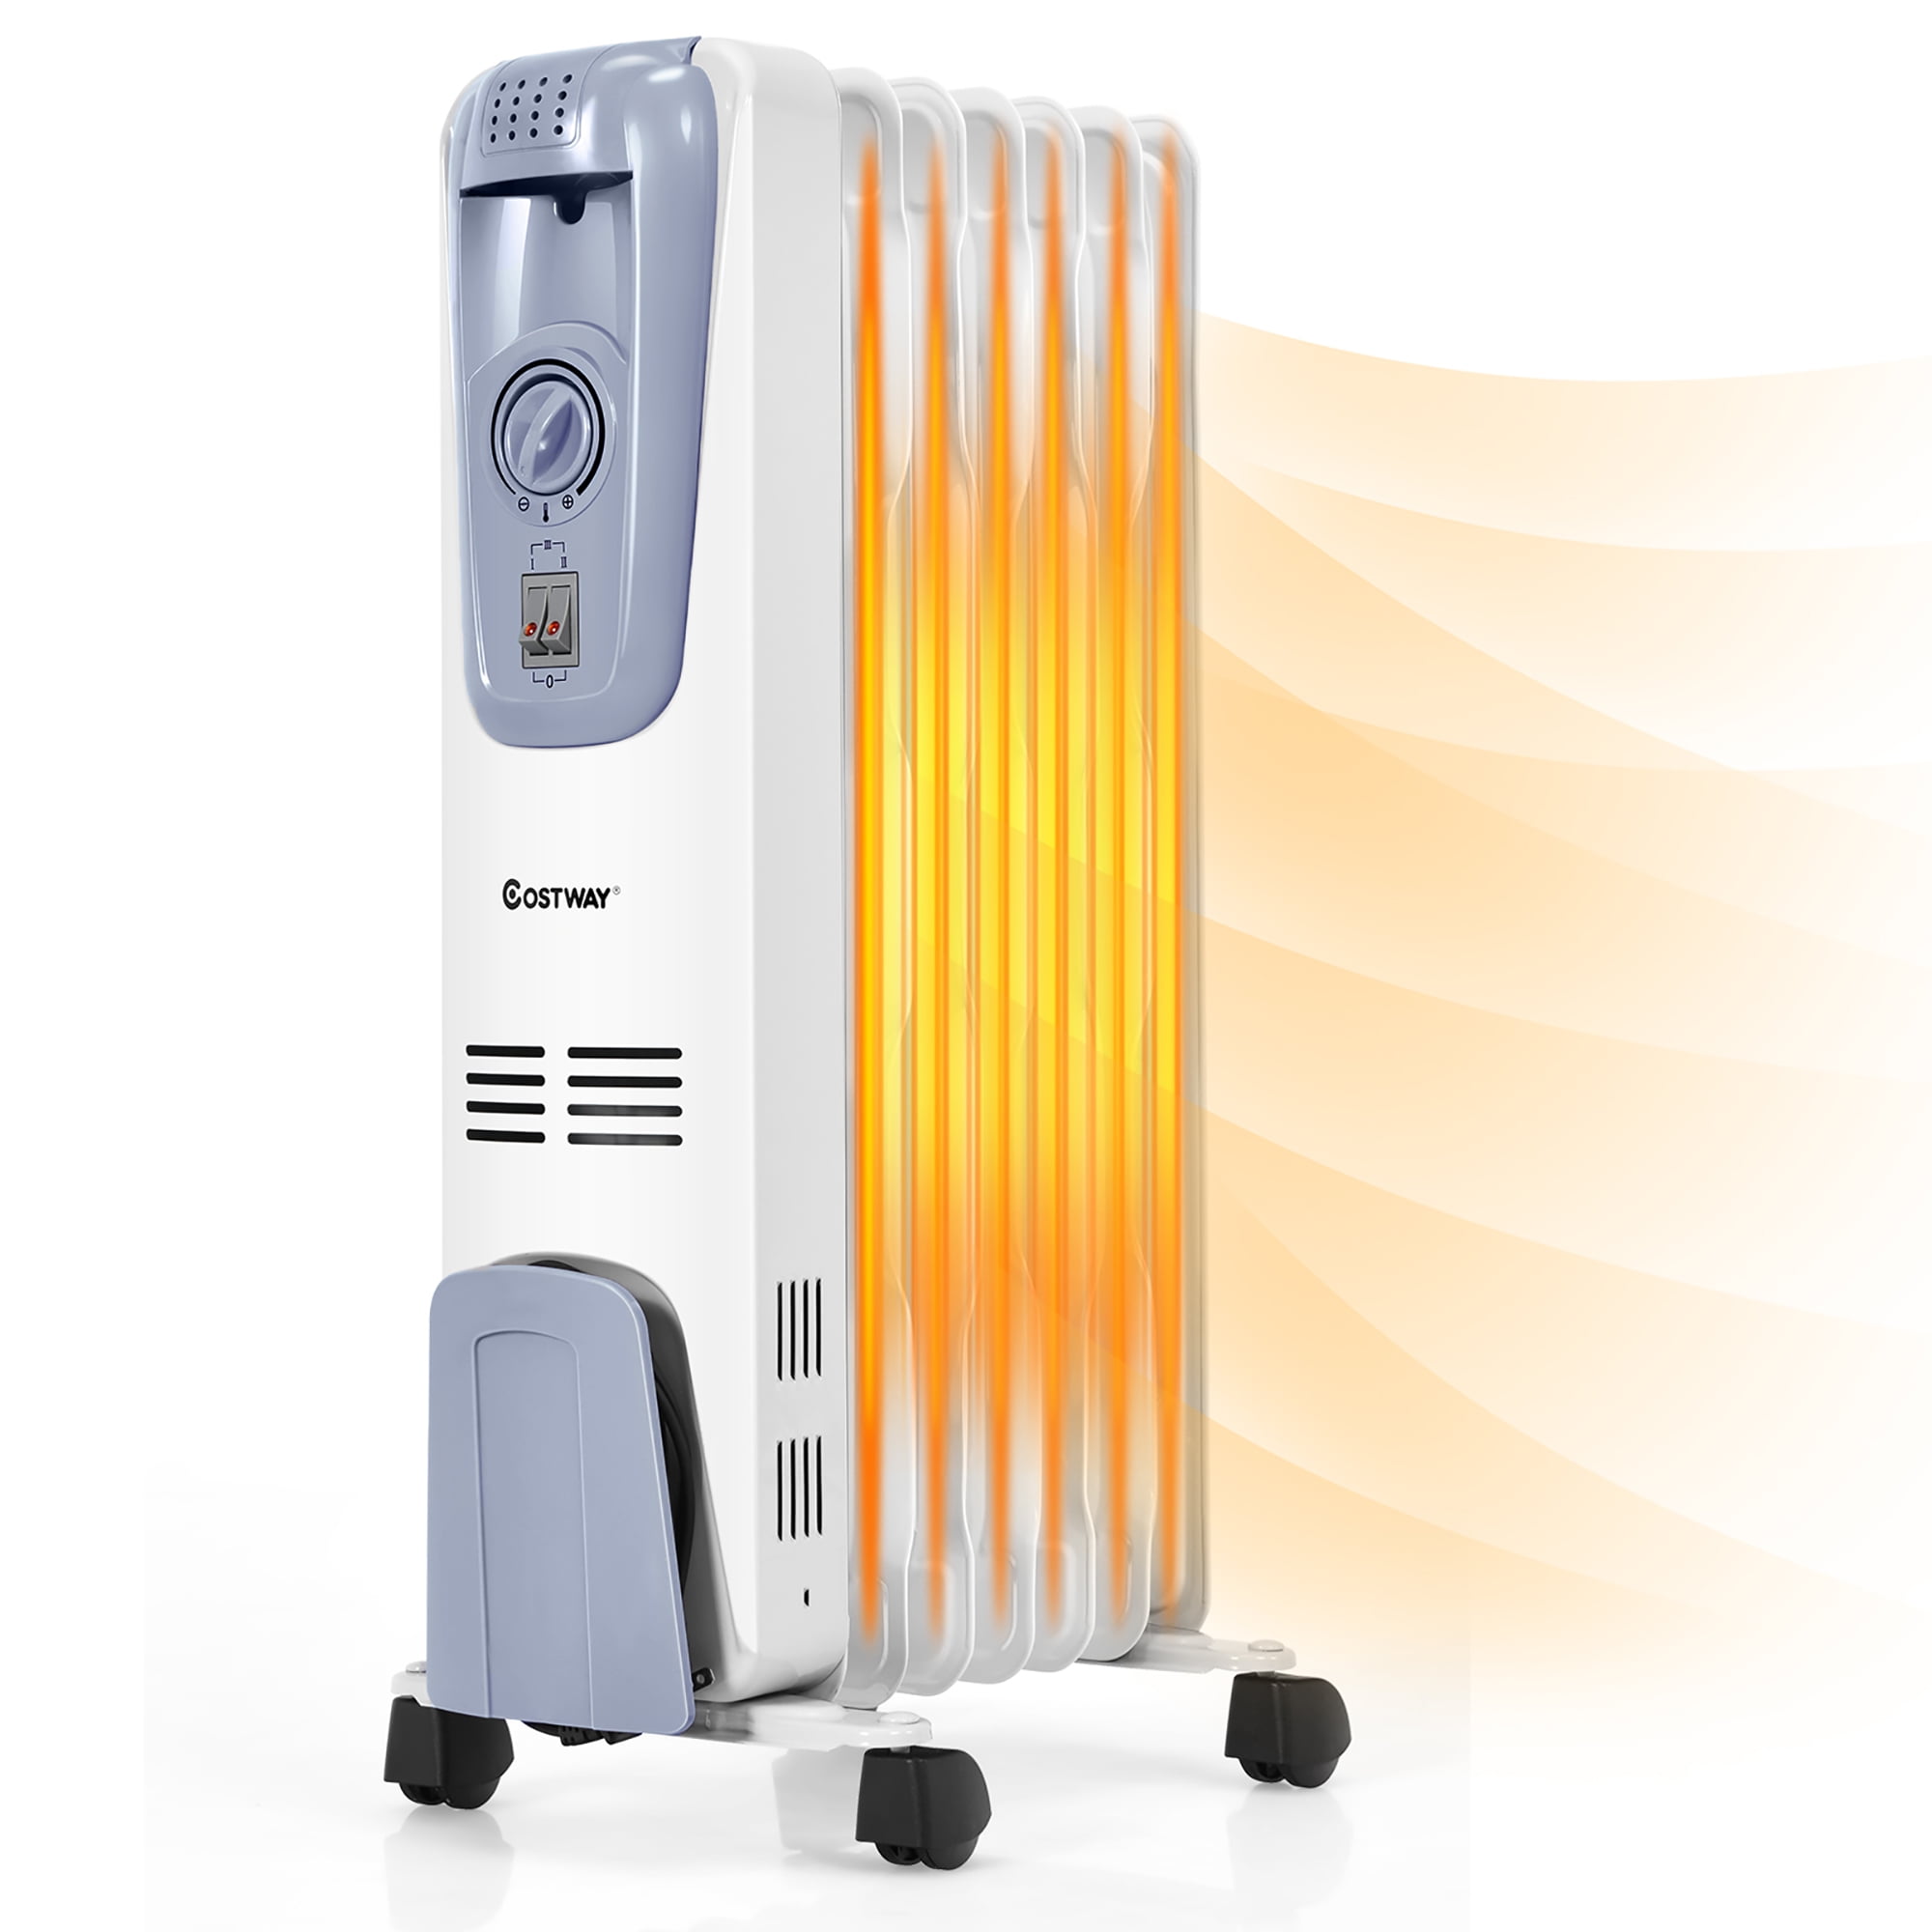 Portable 7 Fin 1500w Electric OIL FILLED RADIATOR Heater With Thermostat  Control